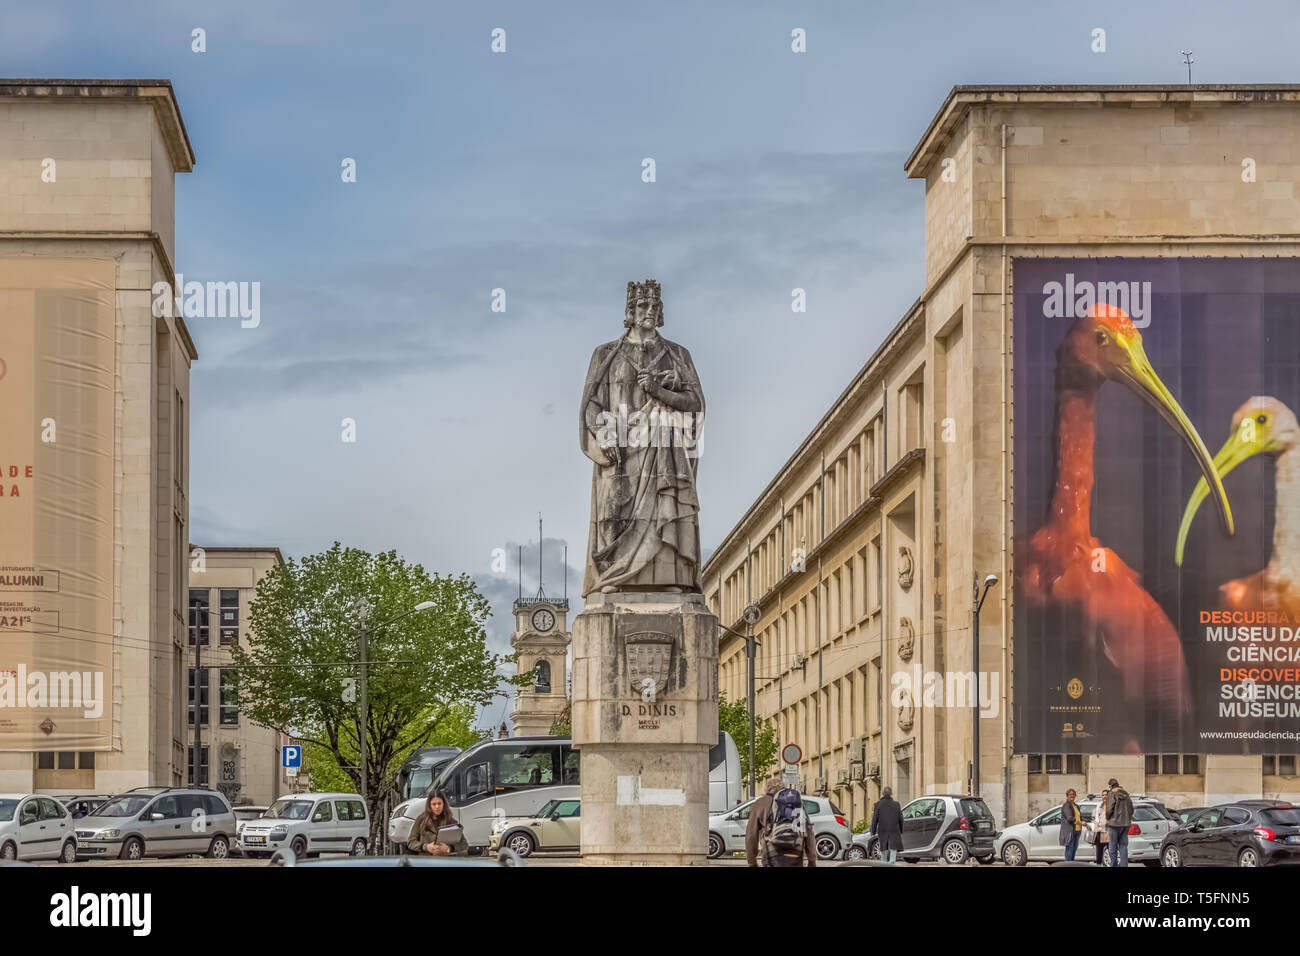 Coimbra / Portugal - 04 04 2019 : View of the statue of king D. Dinis, in the square of the University of Coimbra, surrounding buildings, people and v Stock Photo